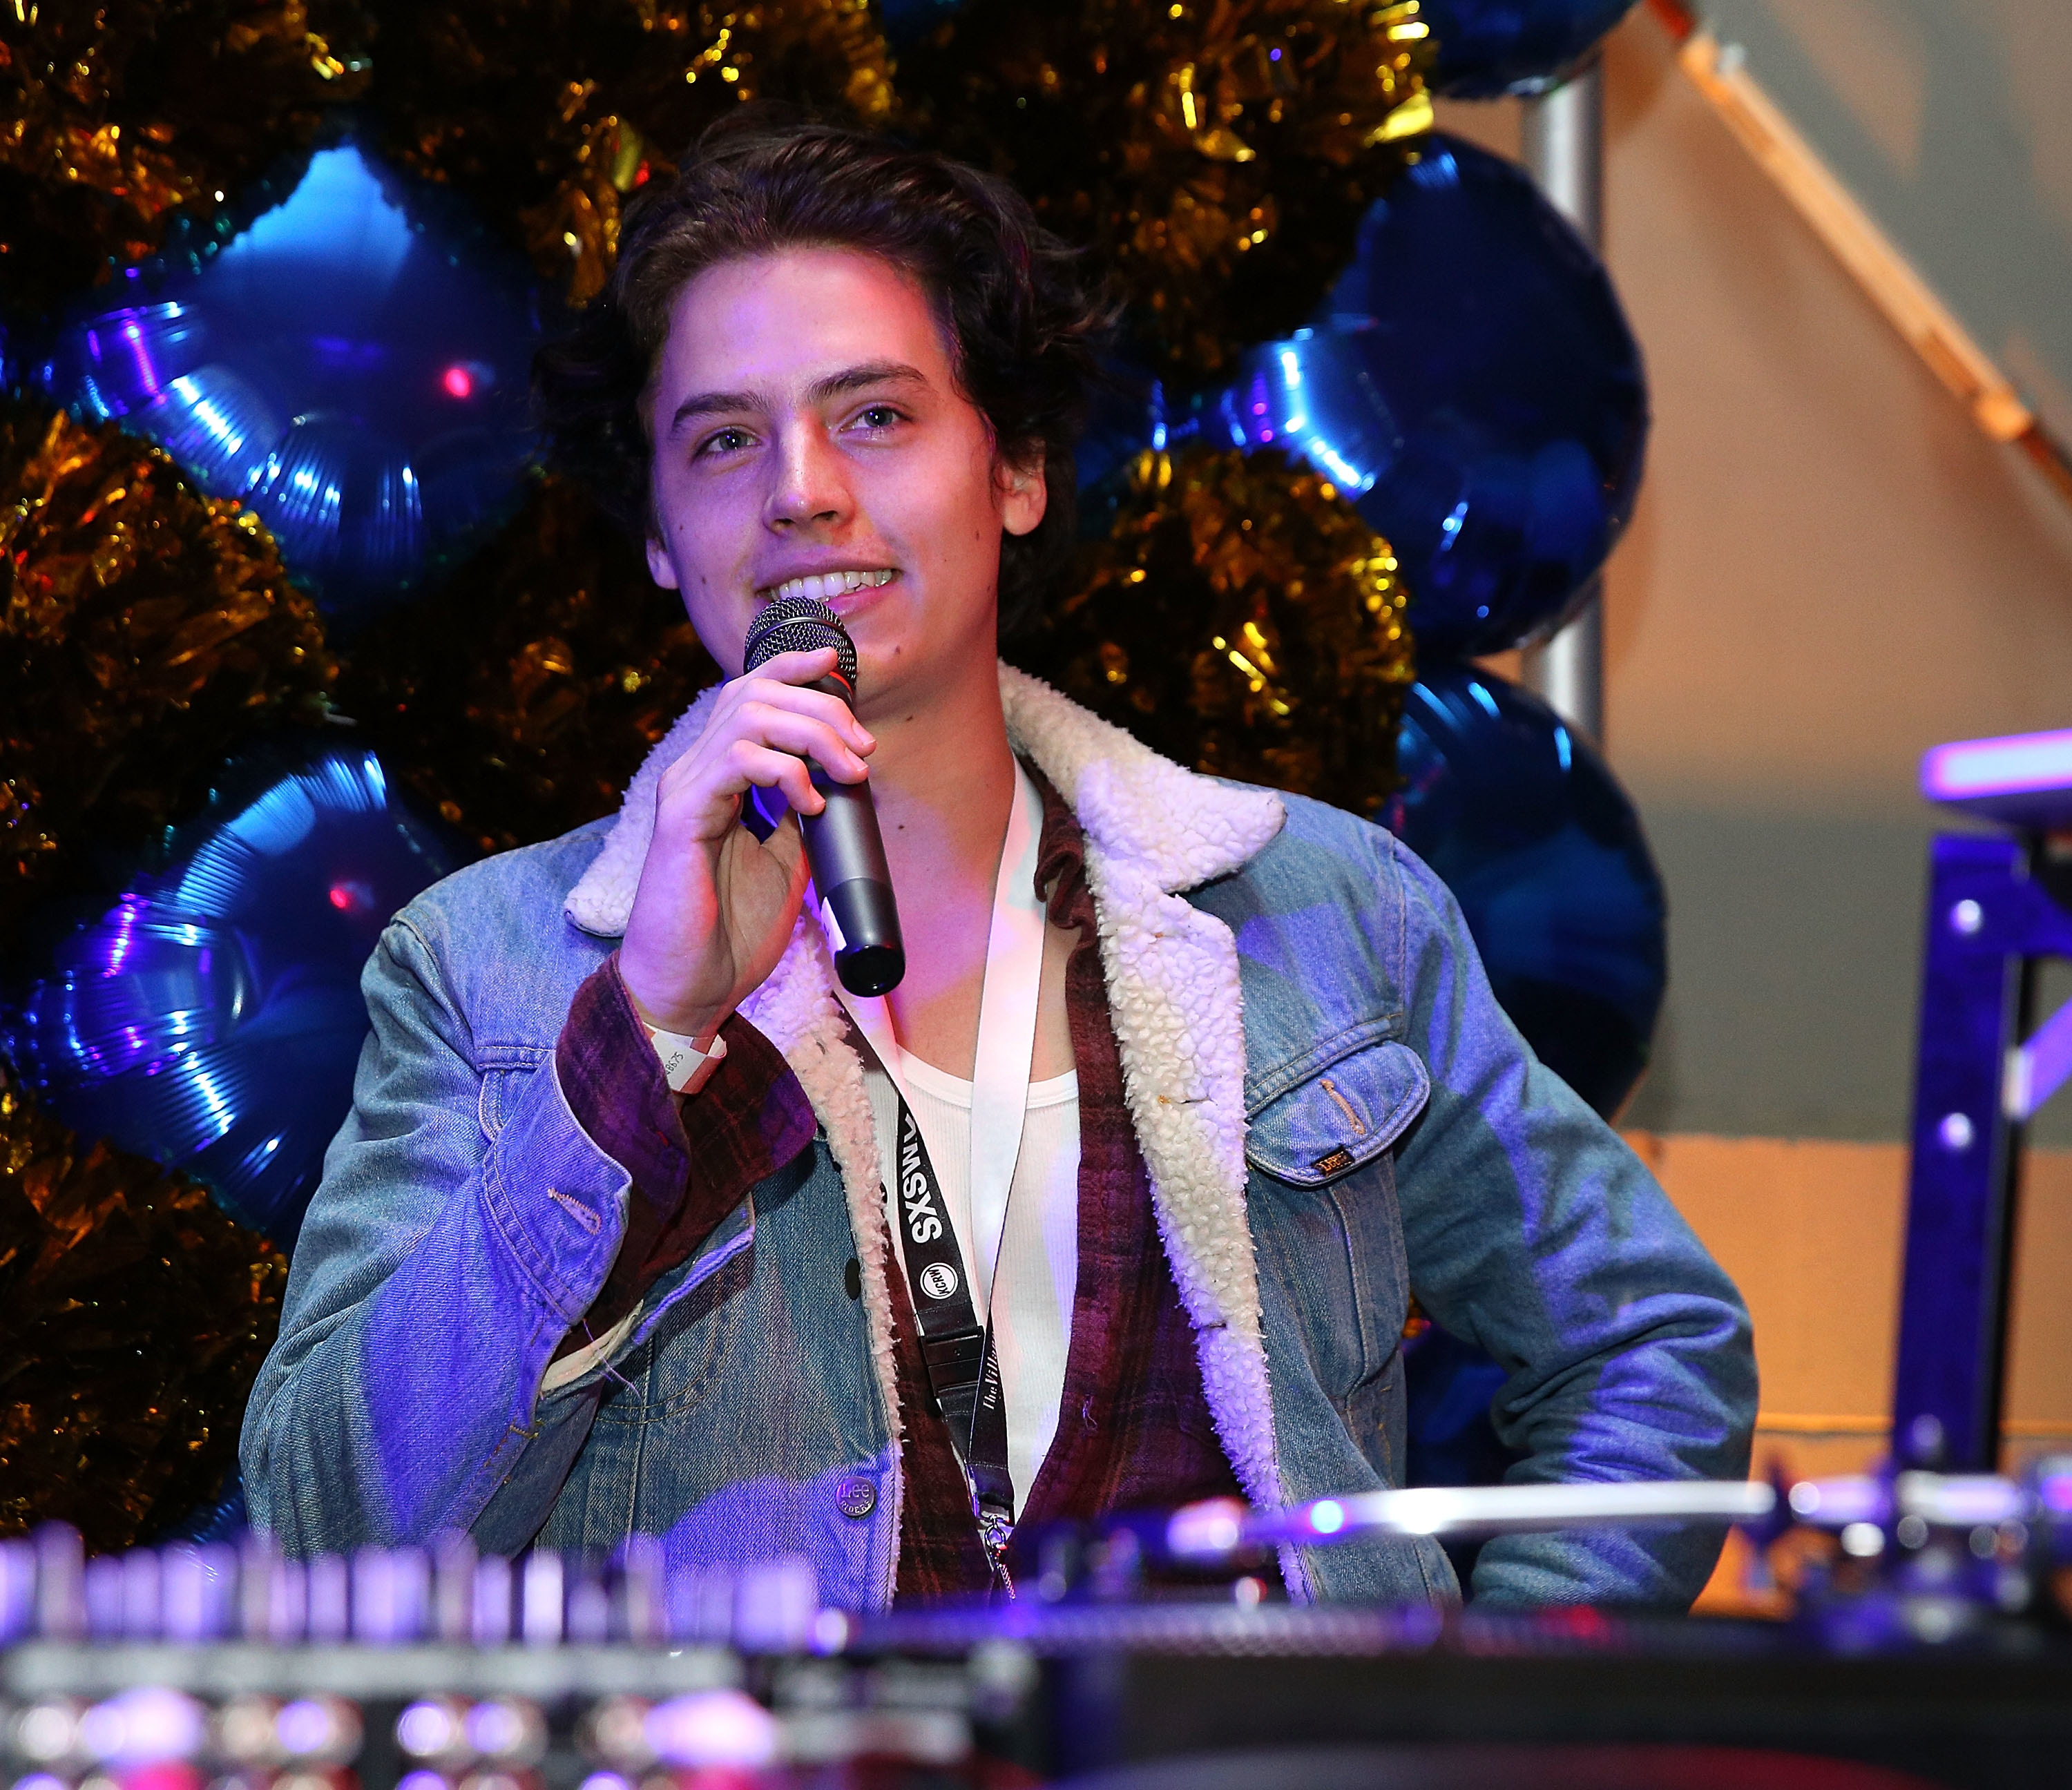 Cole Sprouse speaking at an event